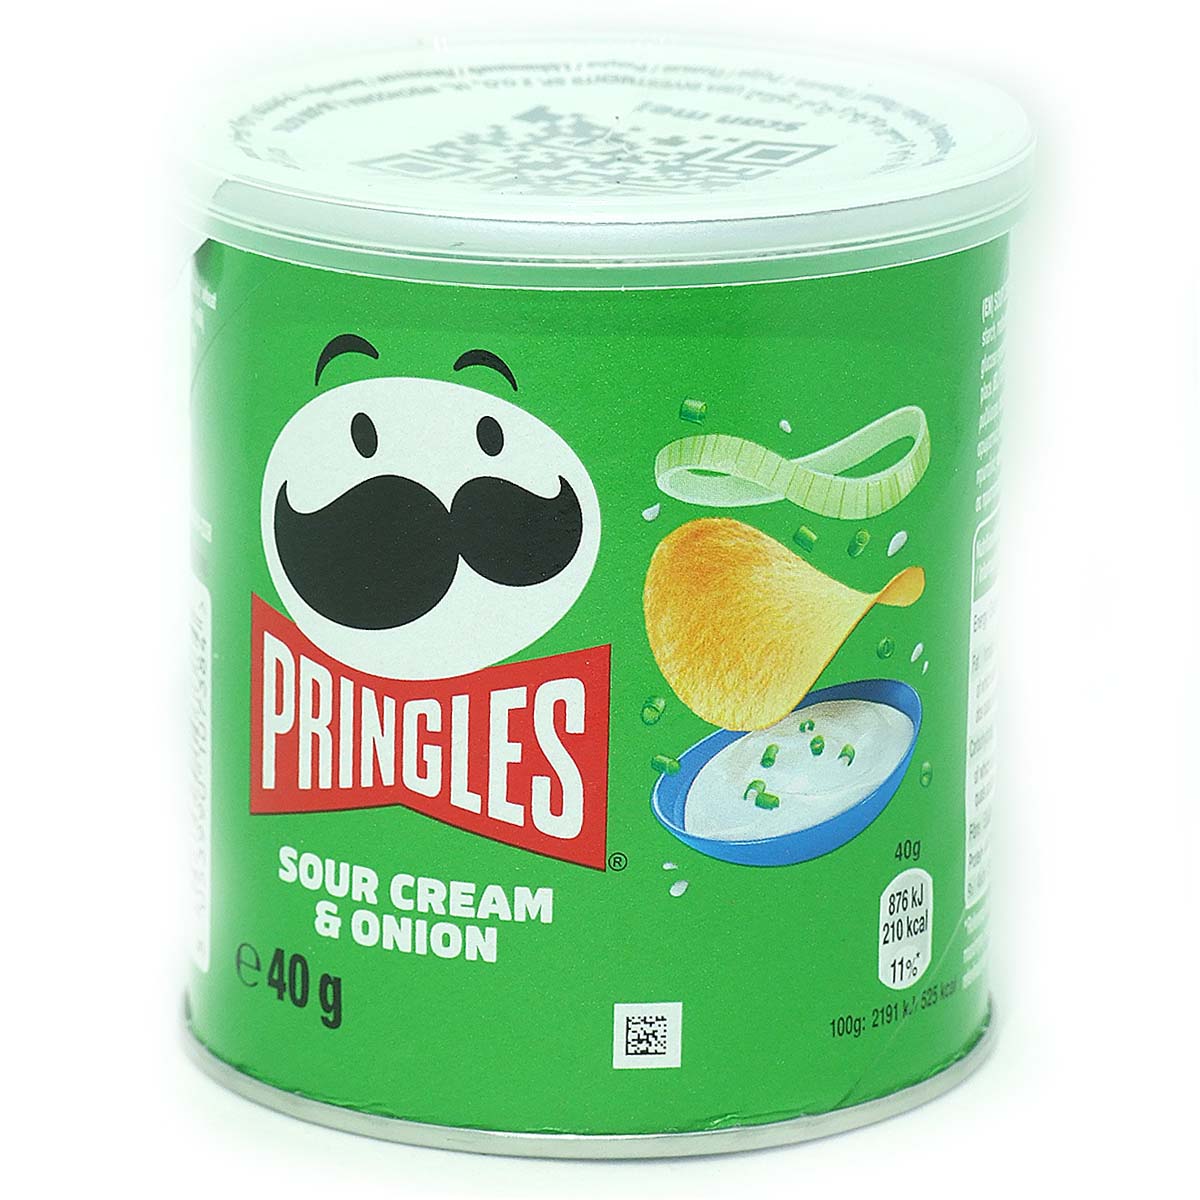 Pringles Sour Cream and Onion Flavour 12 x 40g Unmarked Packs.